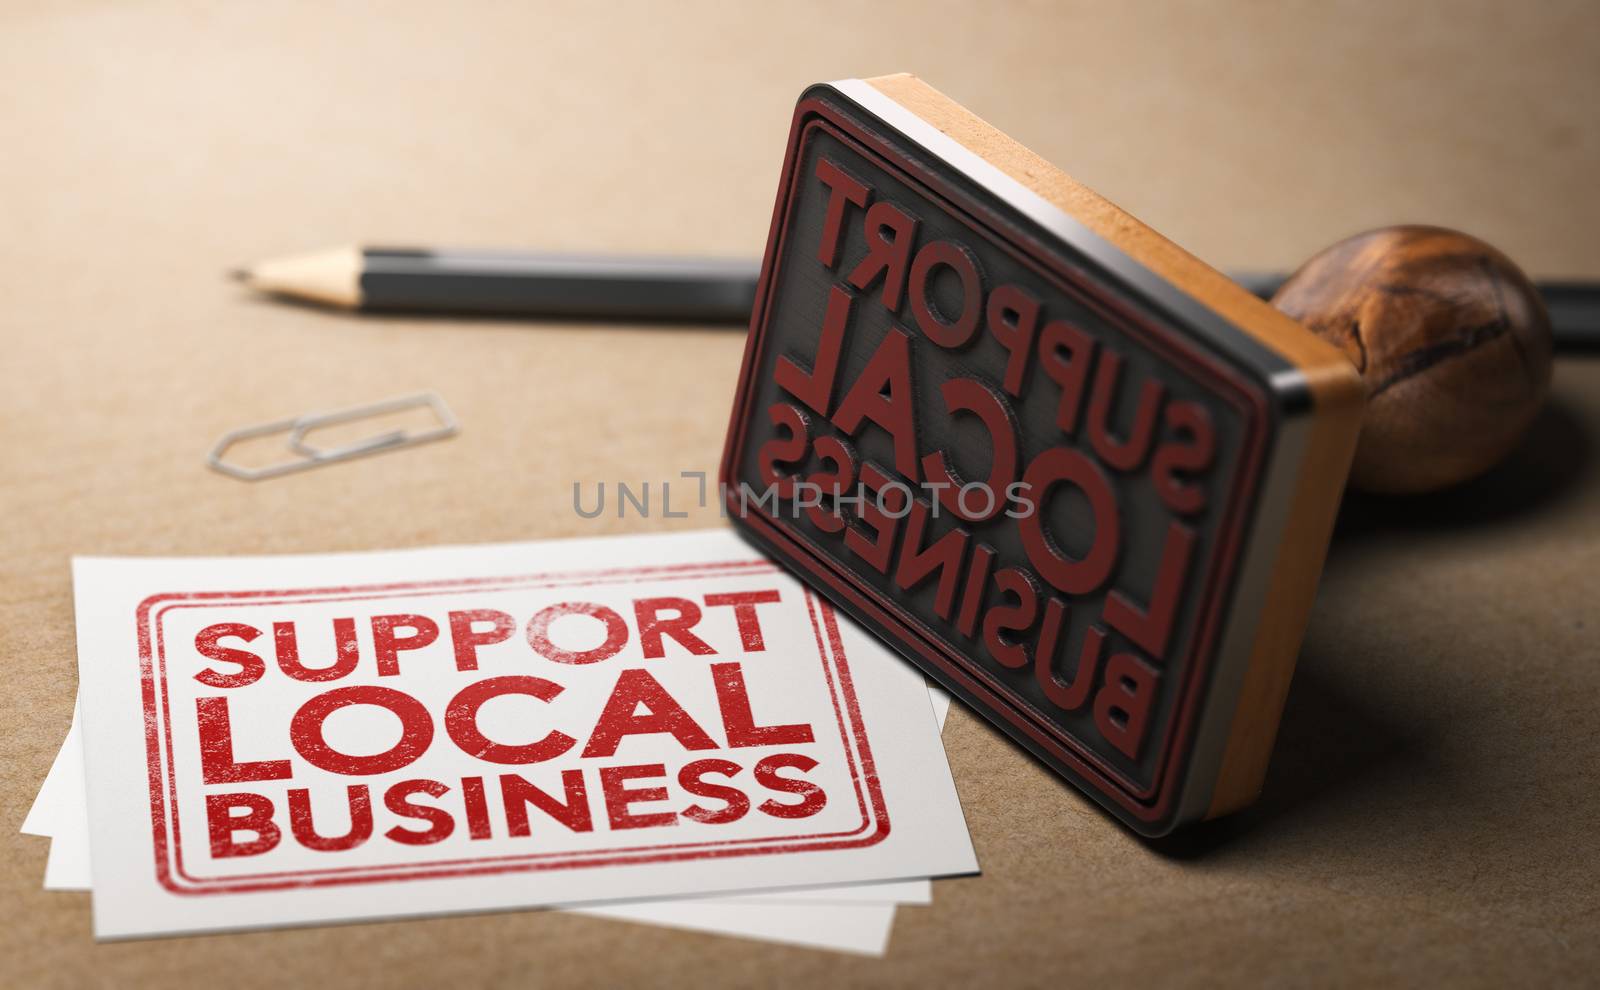 3D illustration of rubber stamp and cards with the text support local business. 